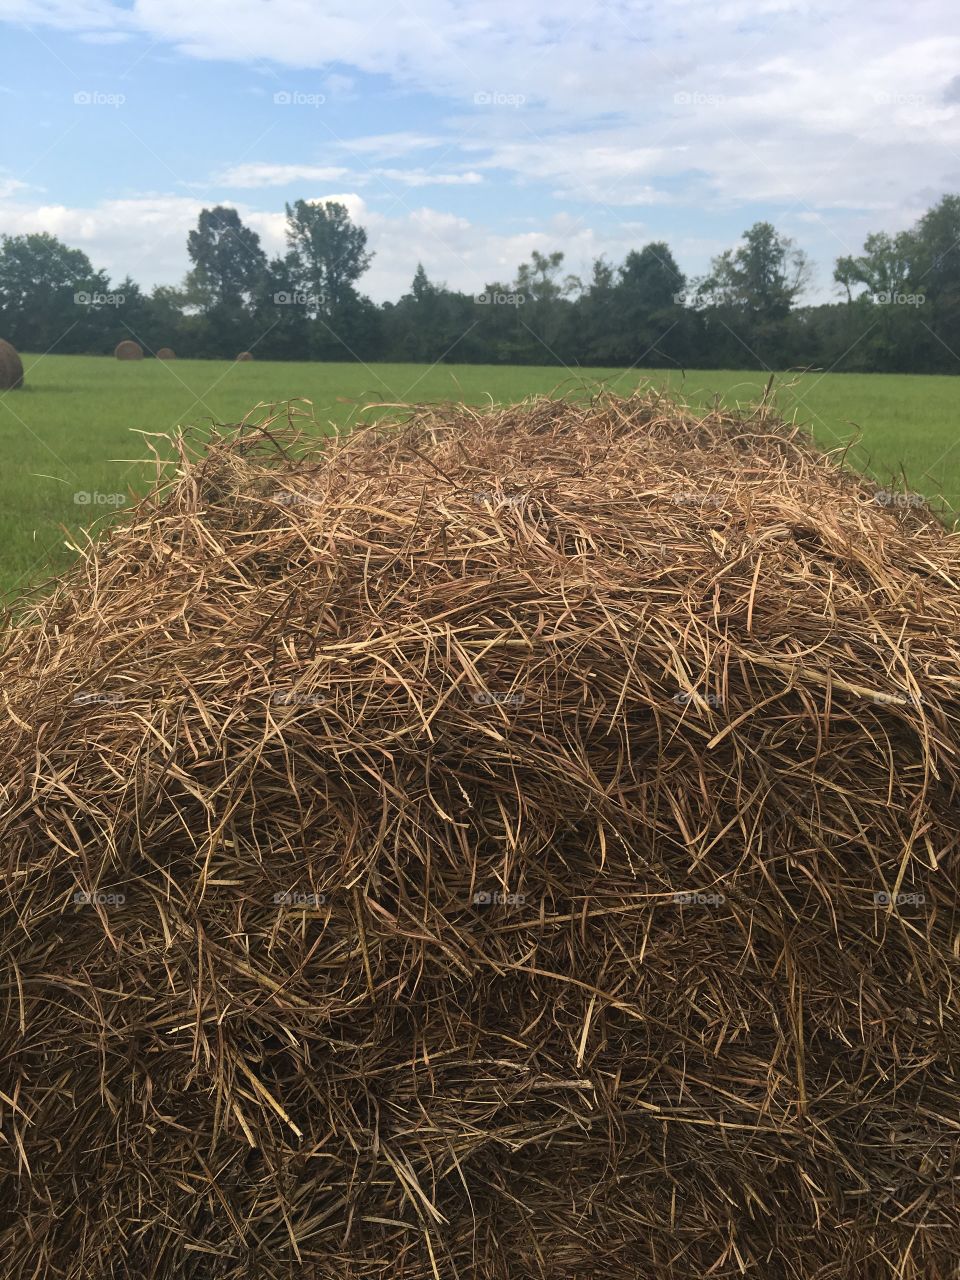 Hay Bale Country 4